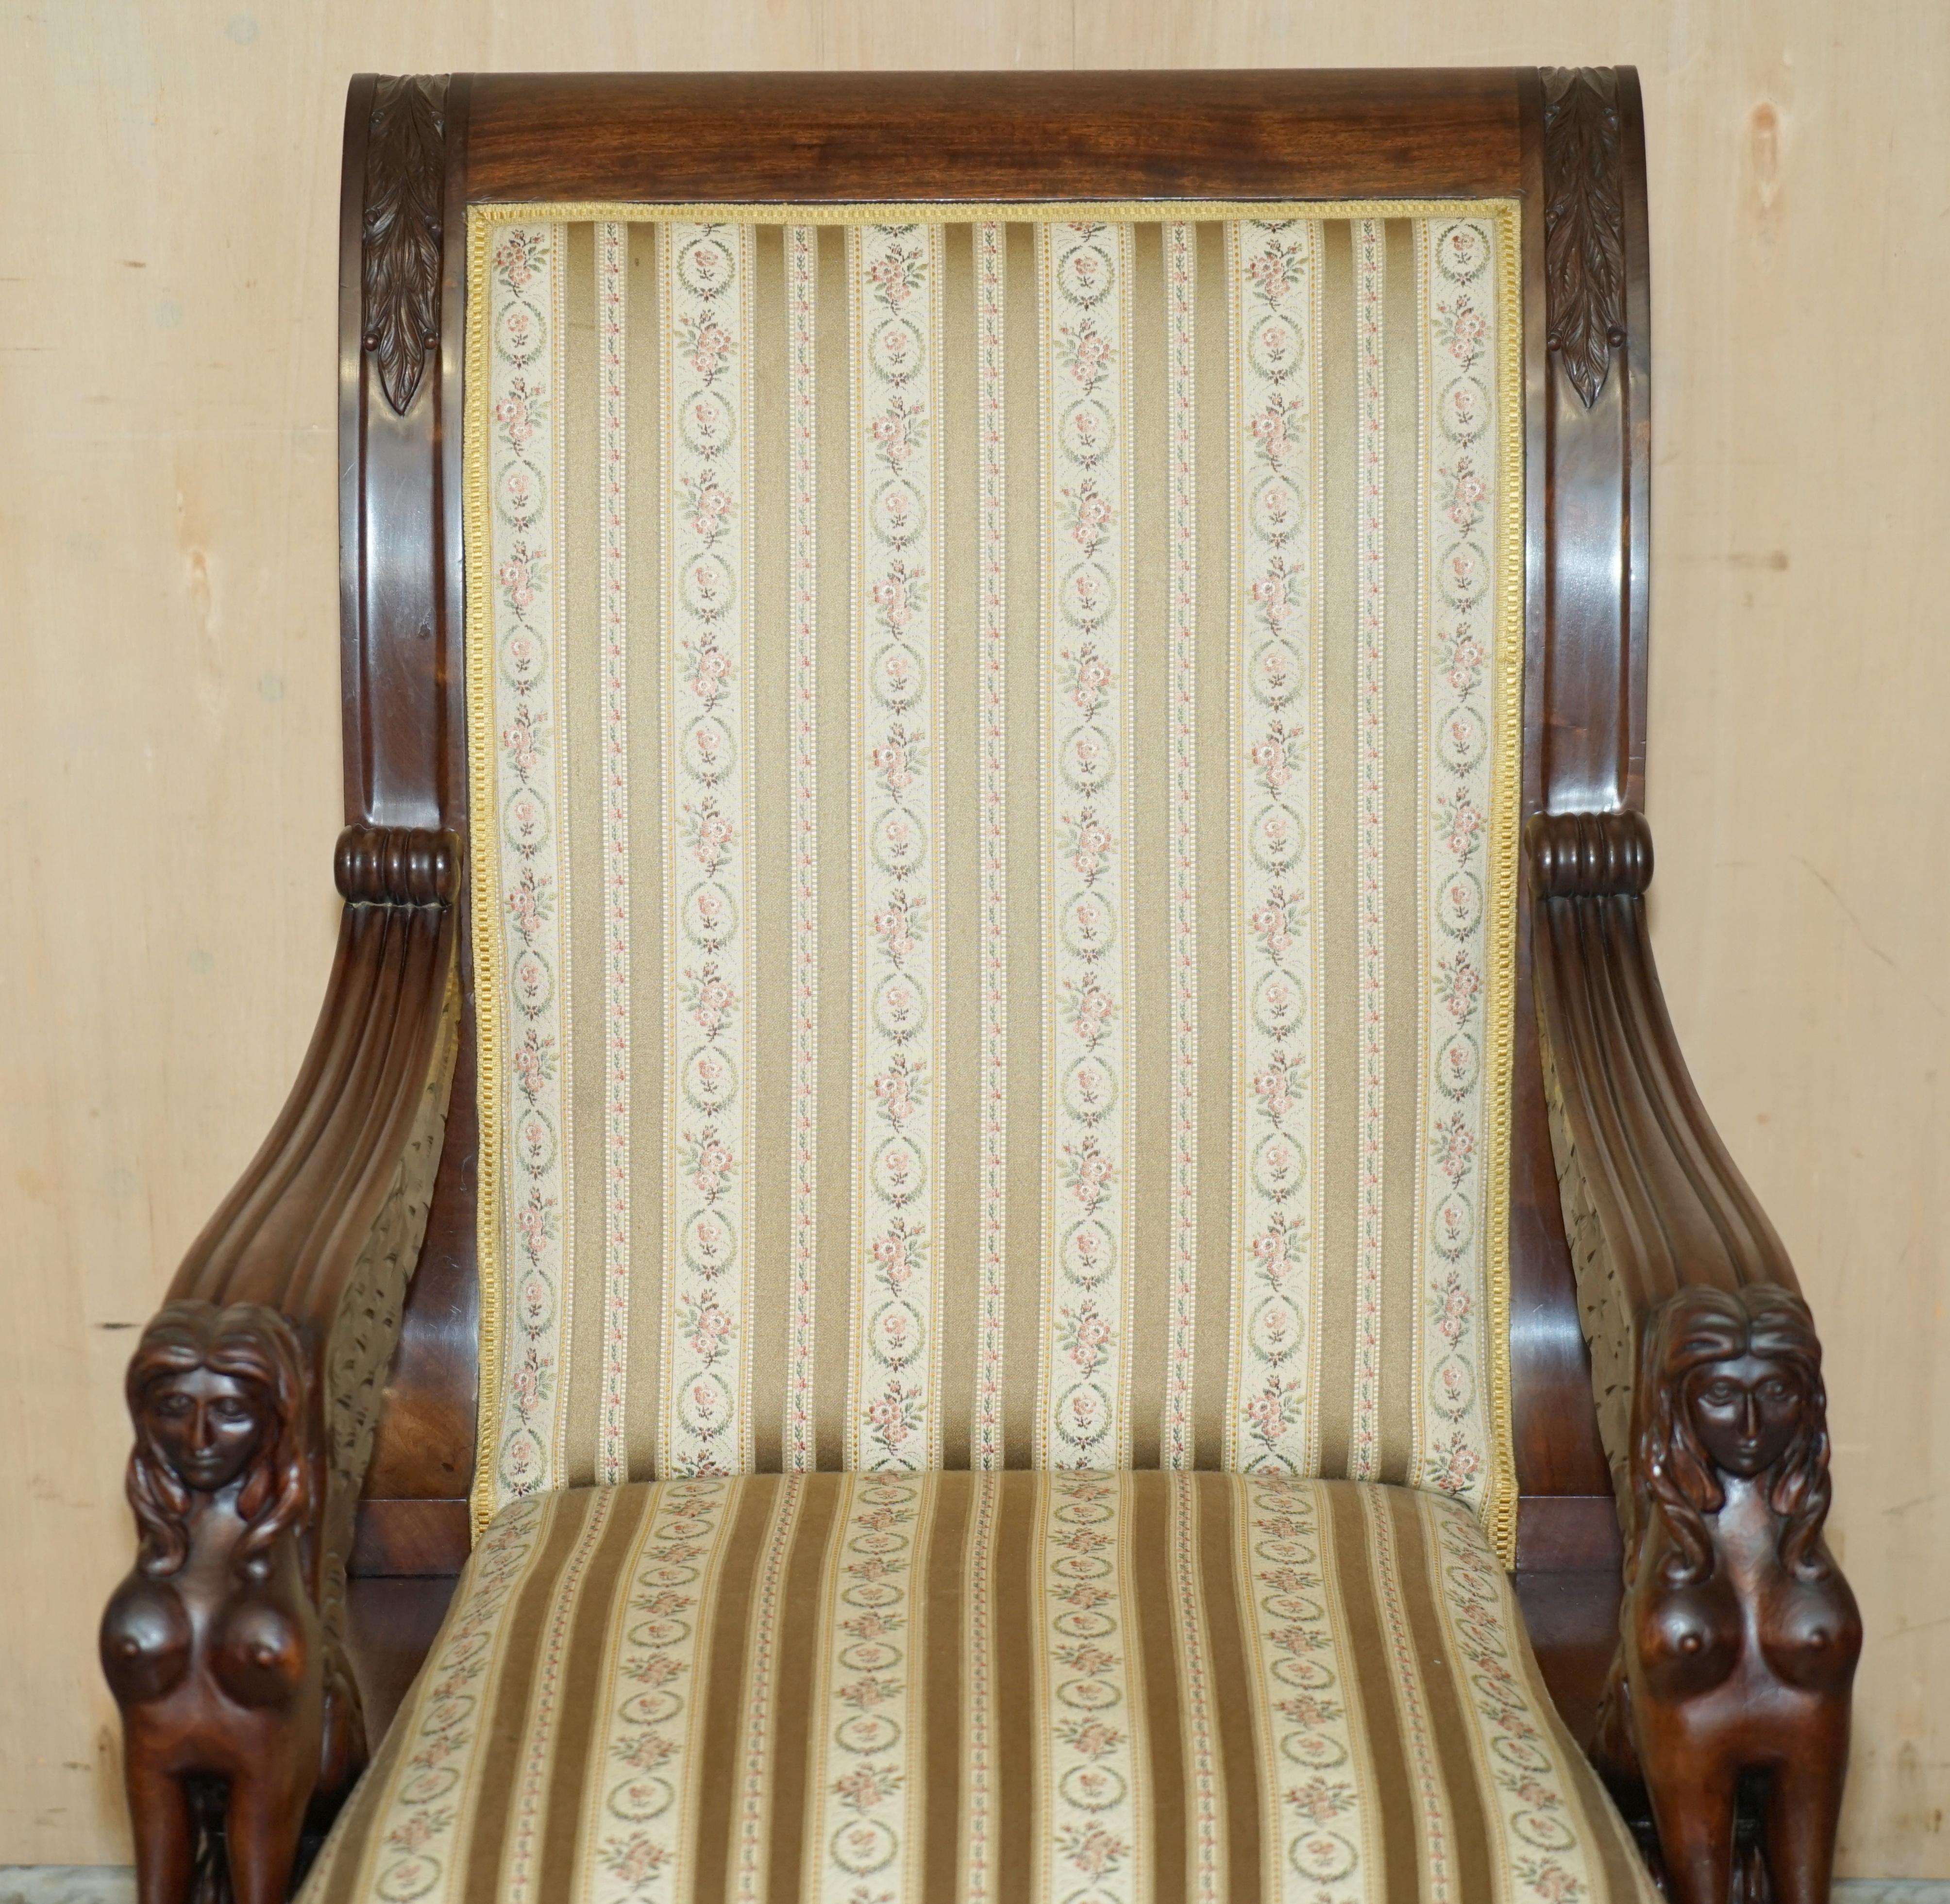 SIX FRENCH HARDWOOD HAND CARVED SPHINX ANTiQUE SALON DINING THRONE CHAIRS 1880 im Angebot 7